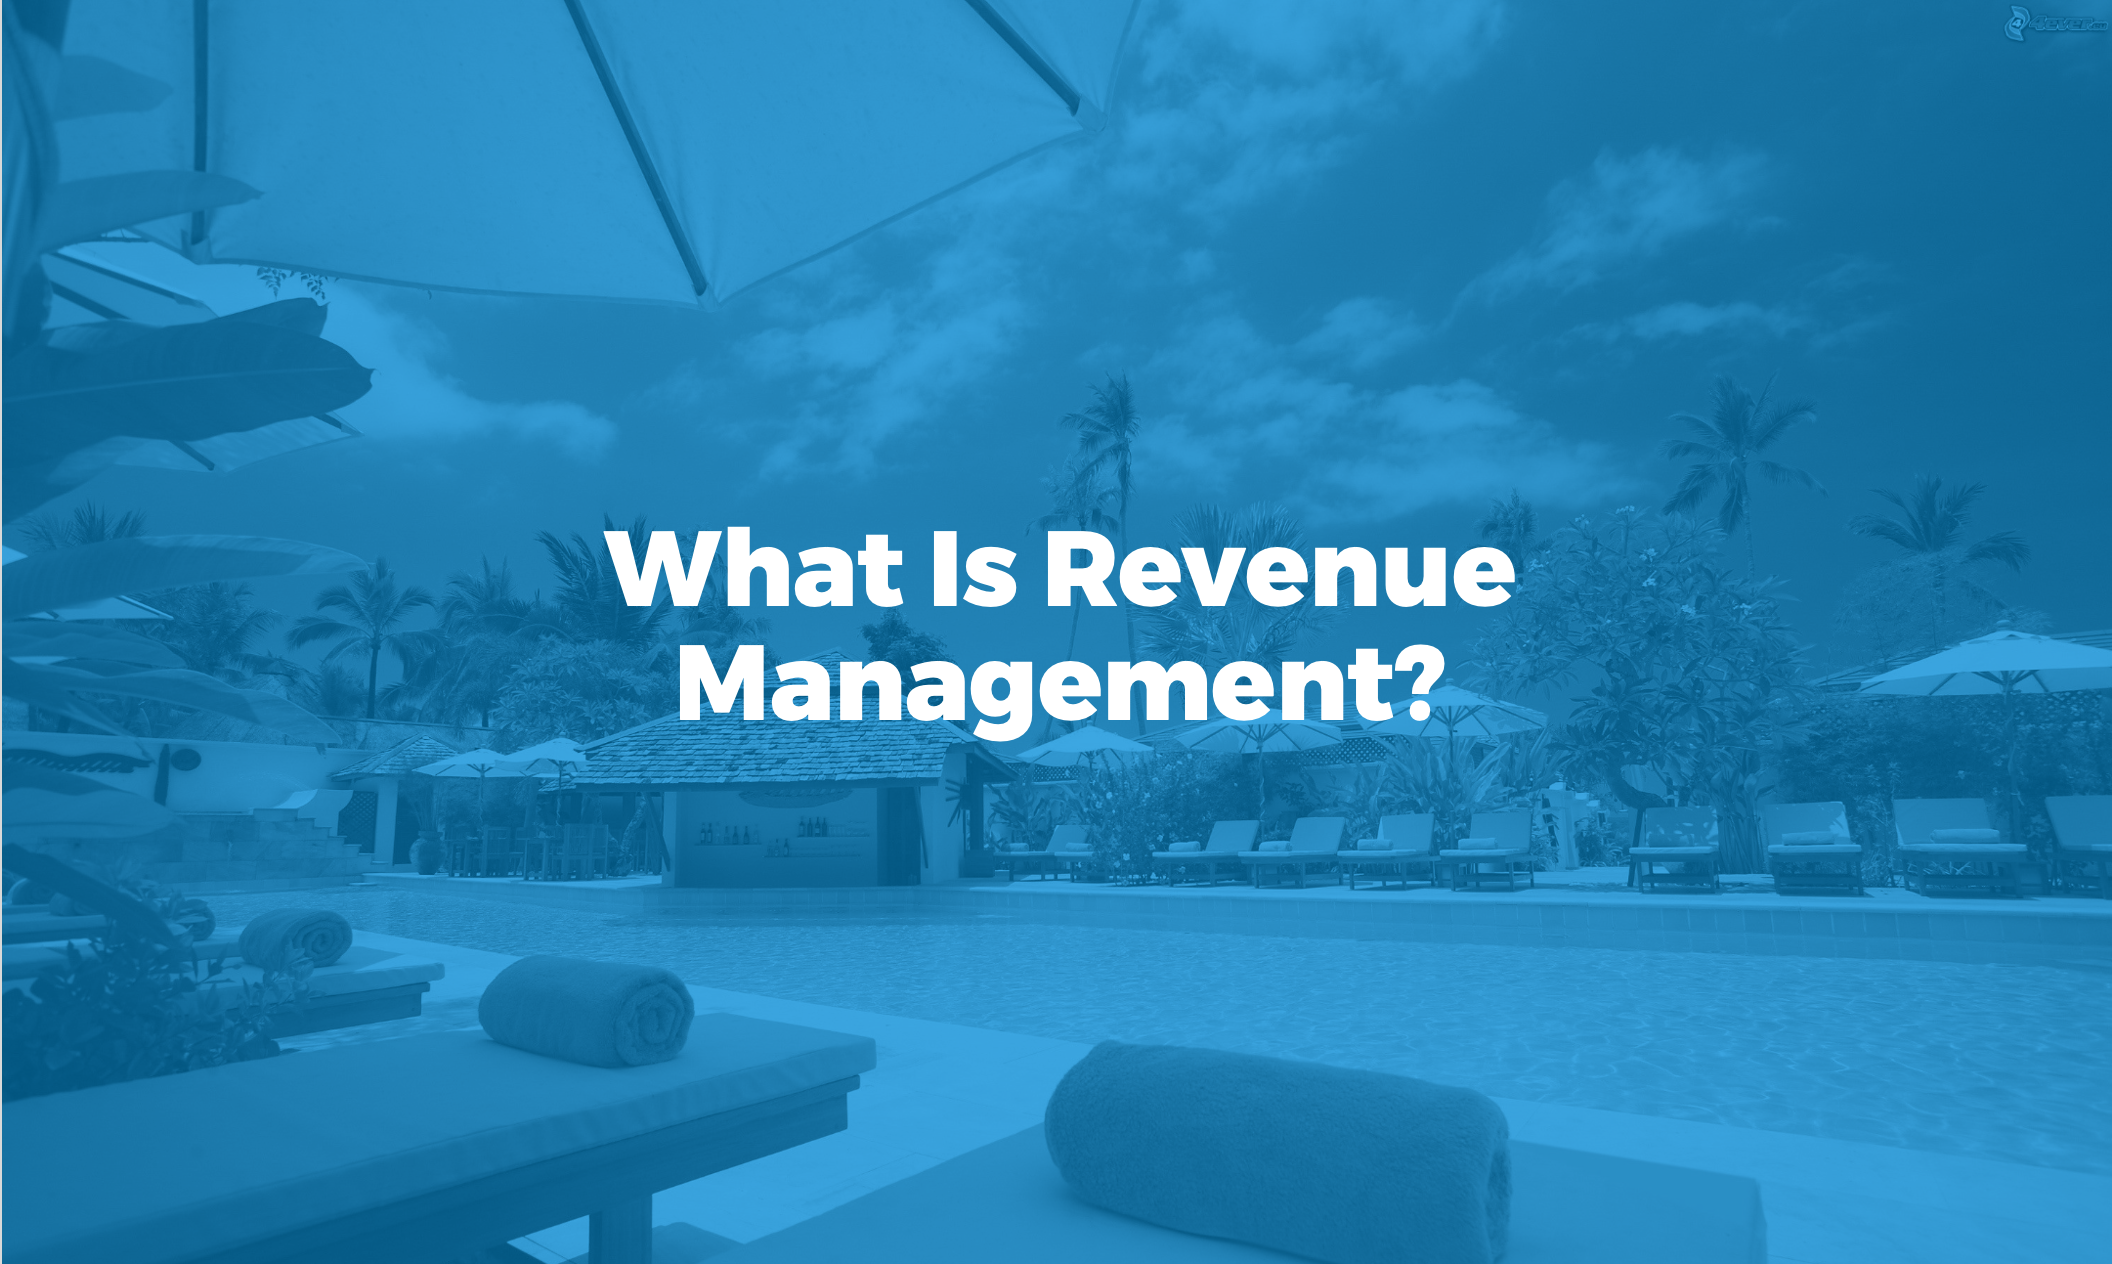 Hotel Revenue Management: how to maximize its power